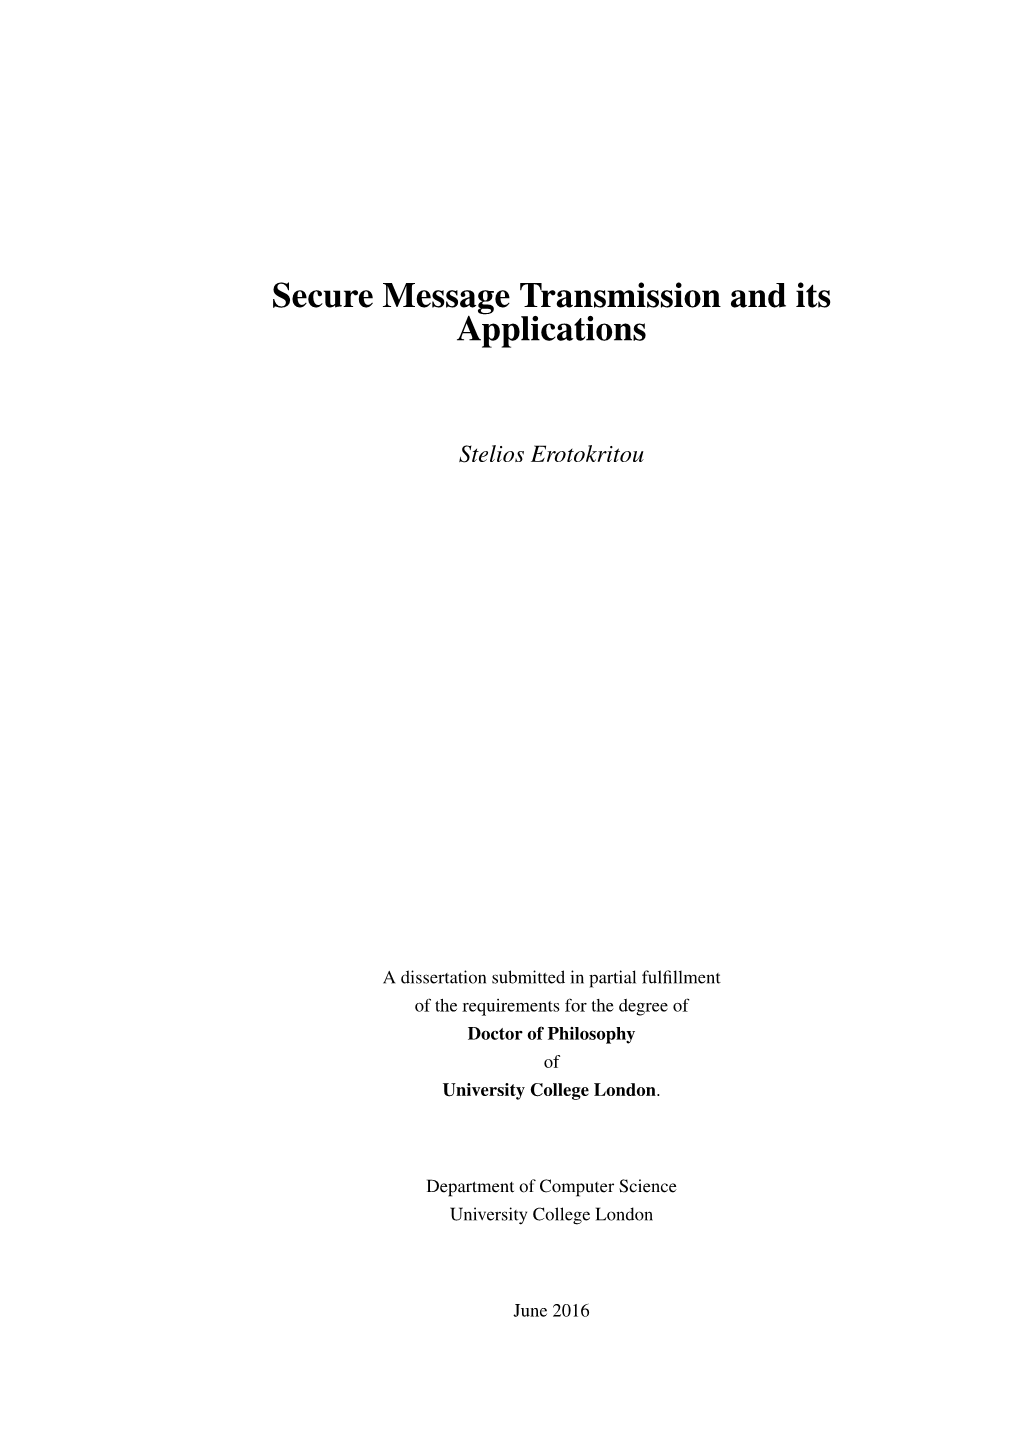 Secure Message Transmission and Its Applications